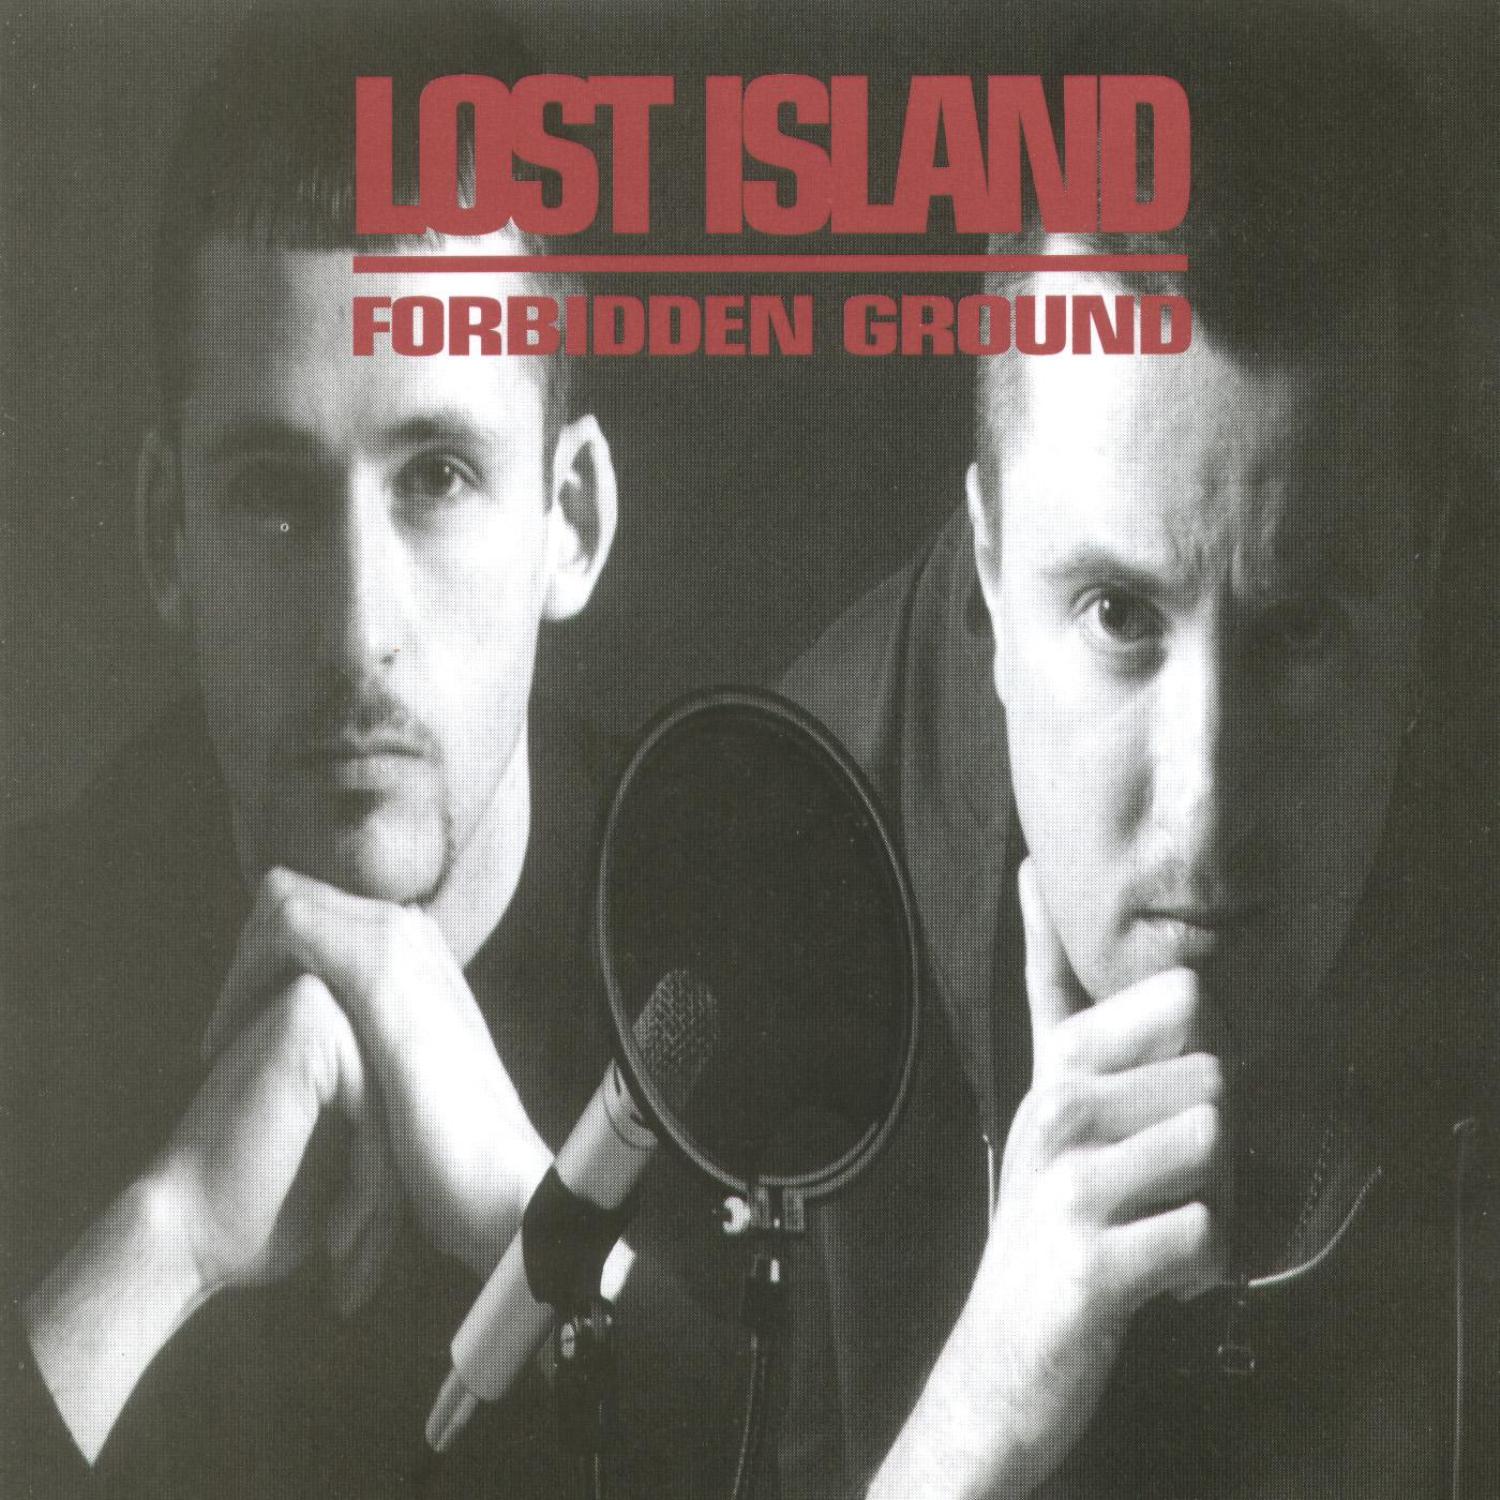 Lost Island - That's The Way It Goes Feat. Cappo & Midnyte